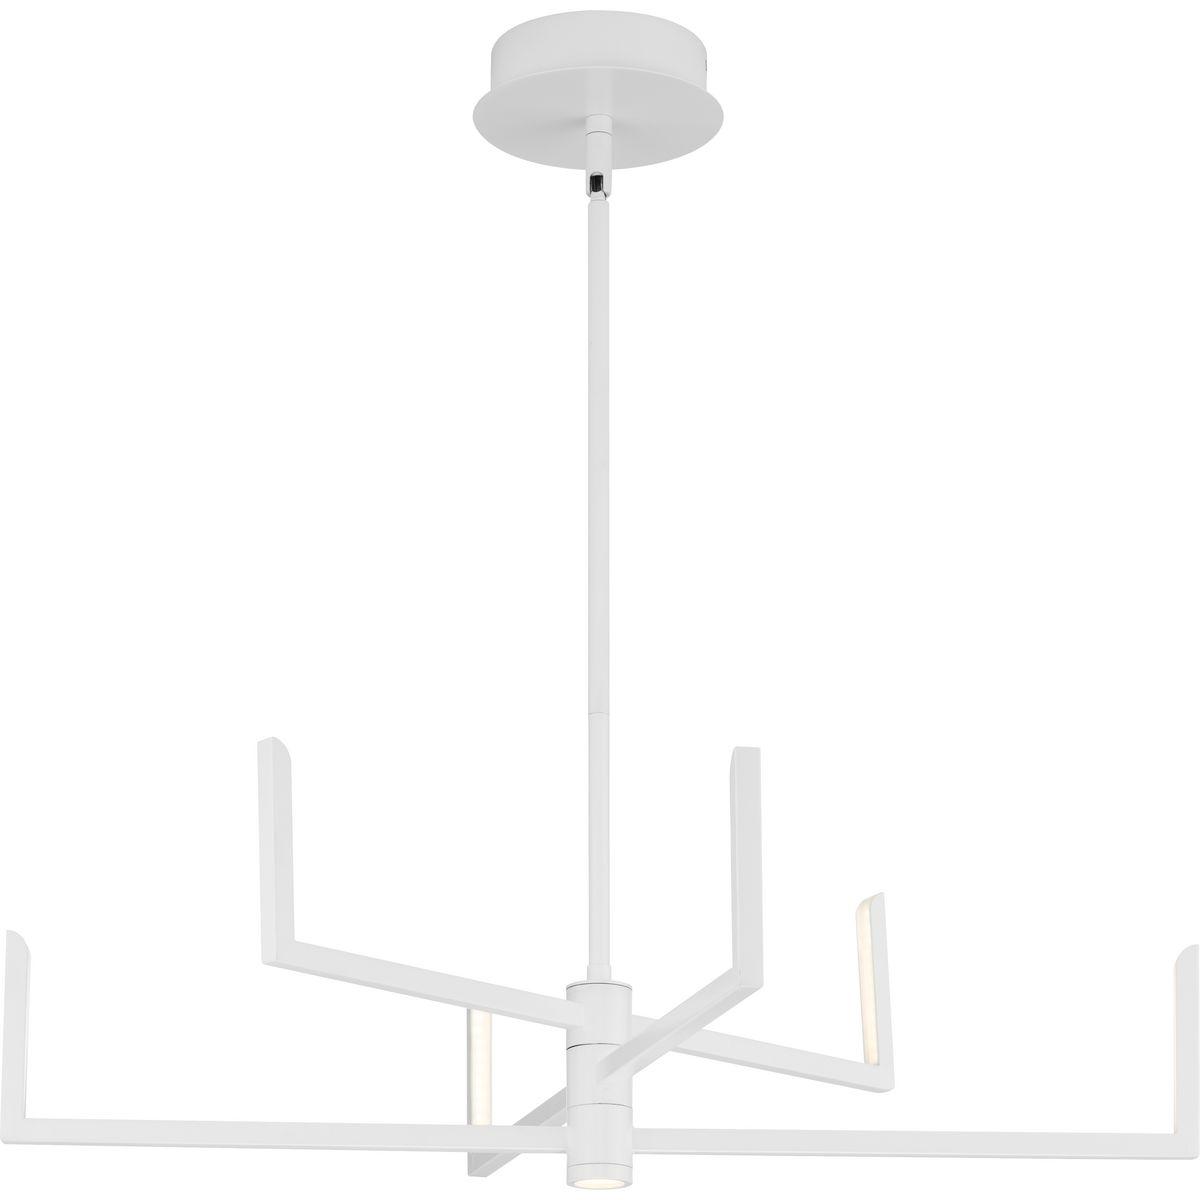 Hubbell P400260-028-30 Capture the imagination with the Pivot LED Collection 6-Light Satin White Frosted Lens LED Modern Chandelier Light. Angled arms coated in a crisp satin white finish rotate around a central axis for a bold architectural form. The arms rotate around a centr